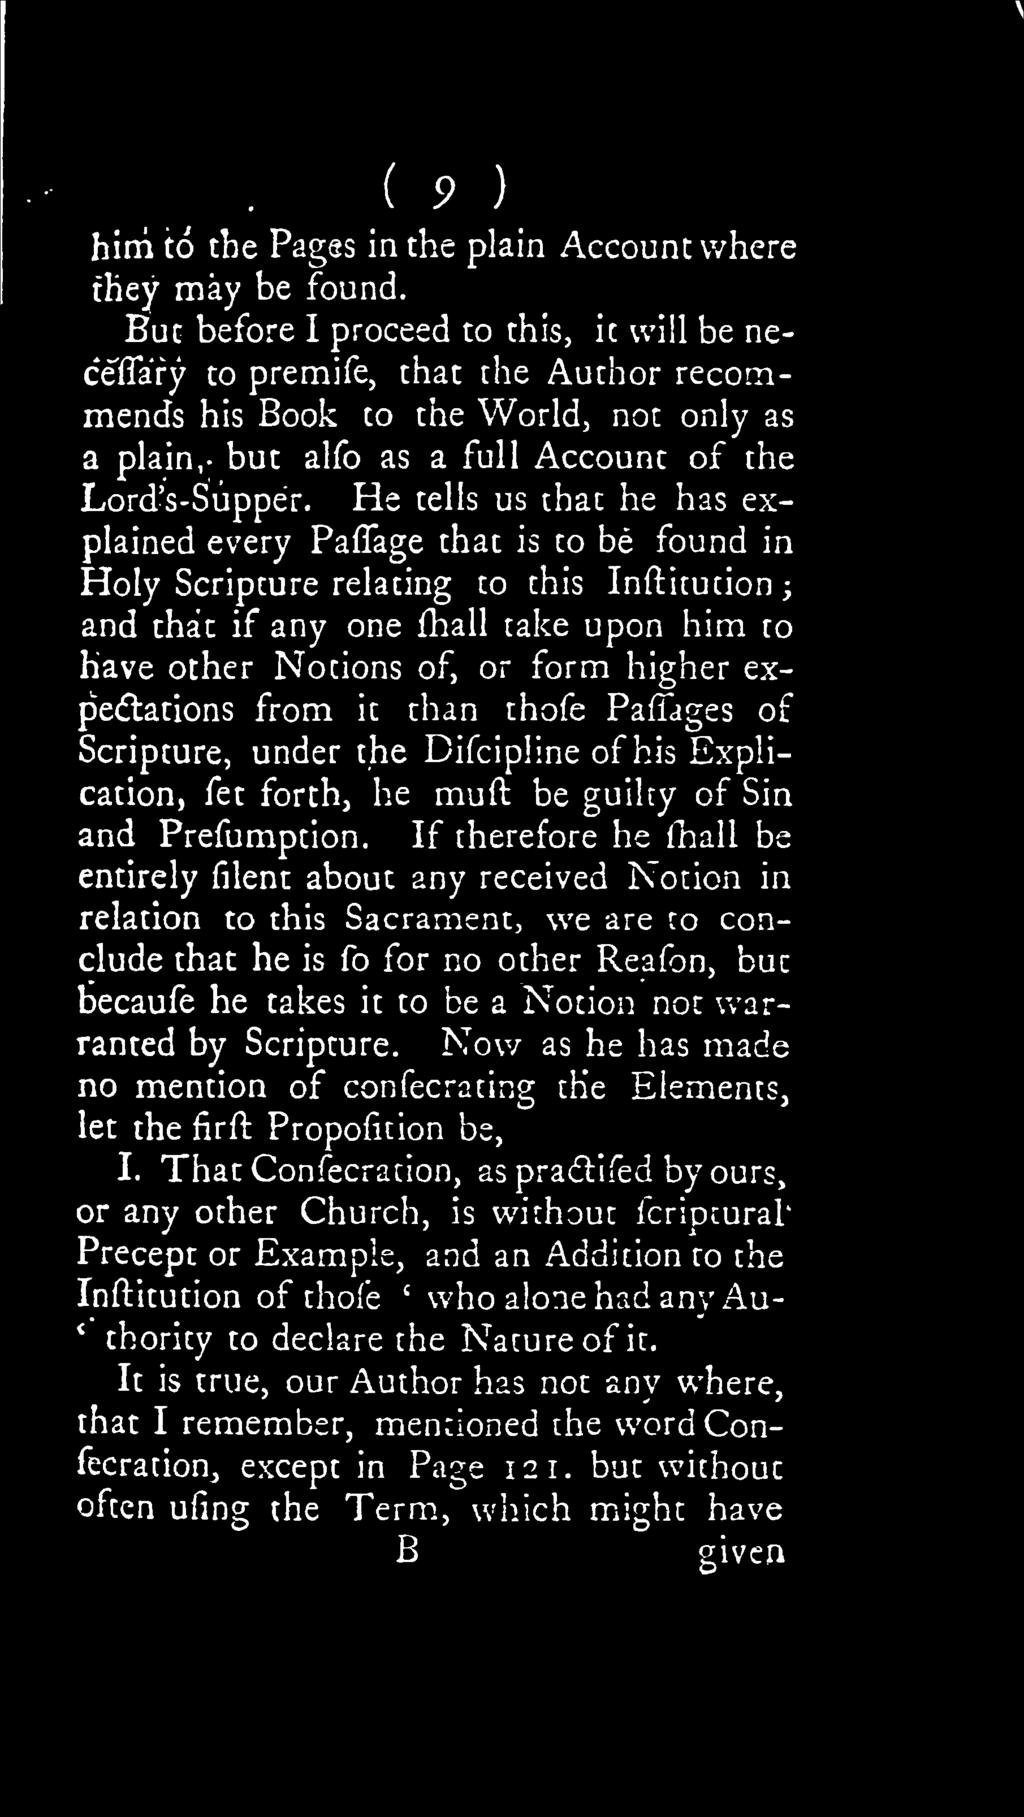 If therefore he iliall be entirely filent about any received Notion in relation to this Sacrament, we are to conclude that he is {o for no other Reafon, buc becaufe he takes it to be a Notion not